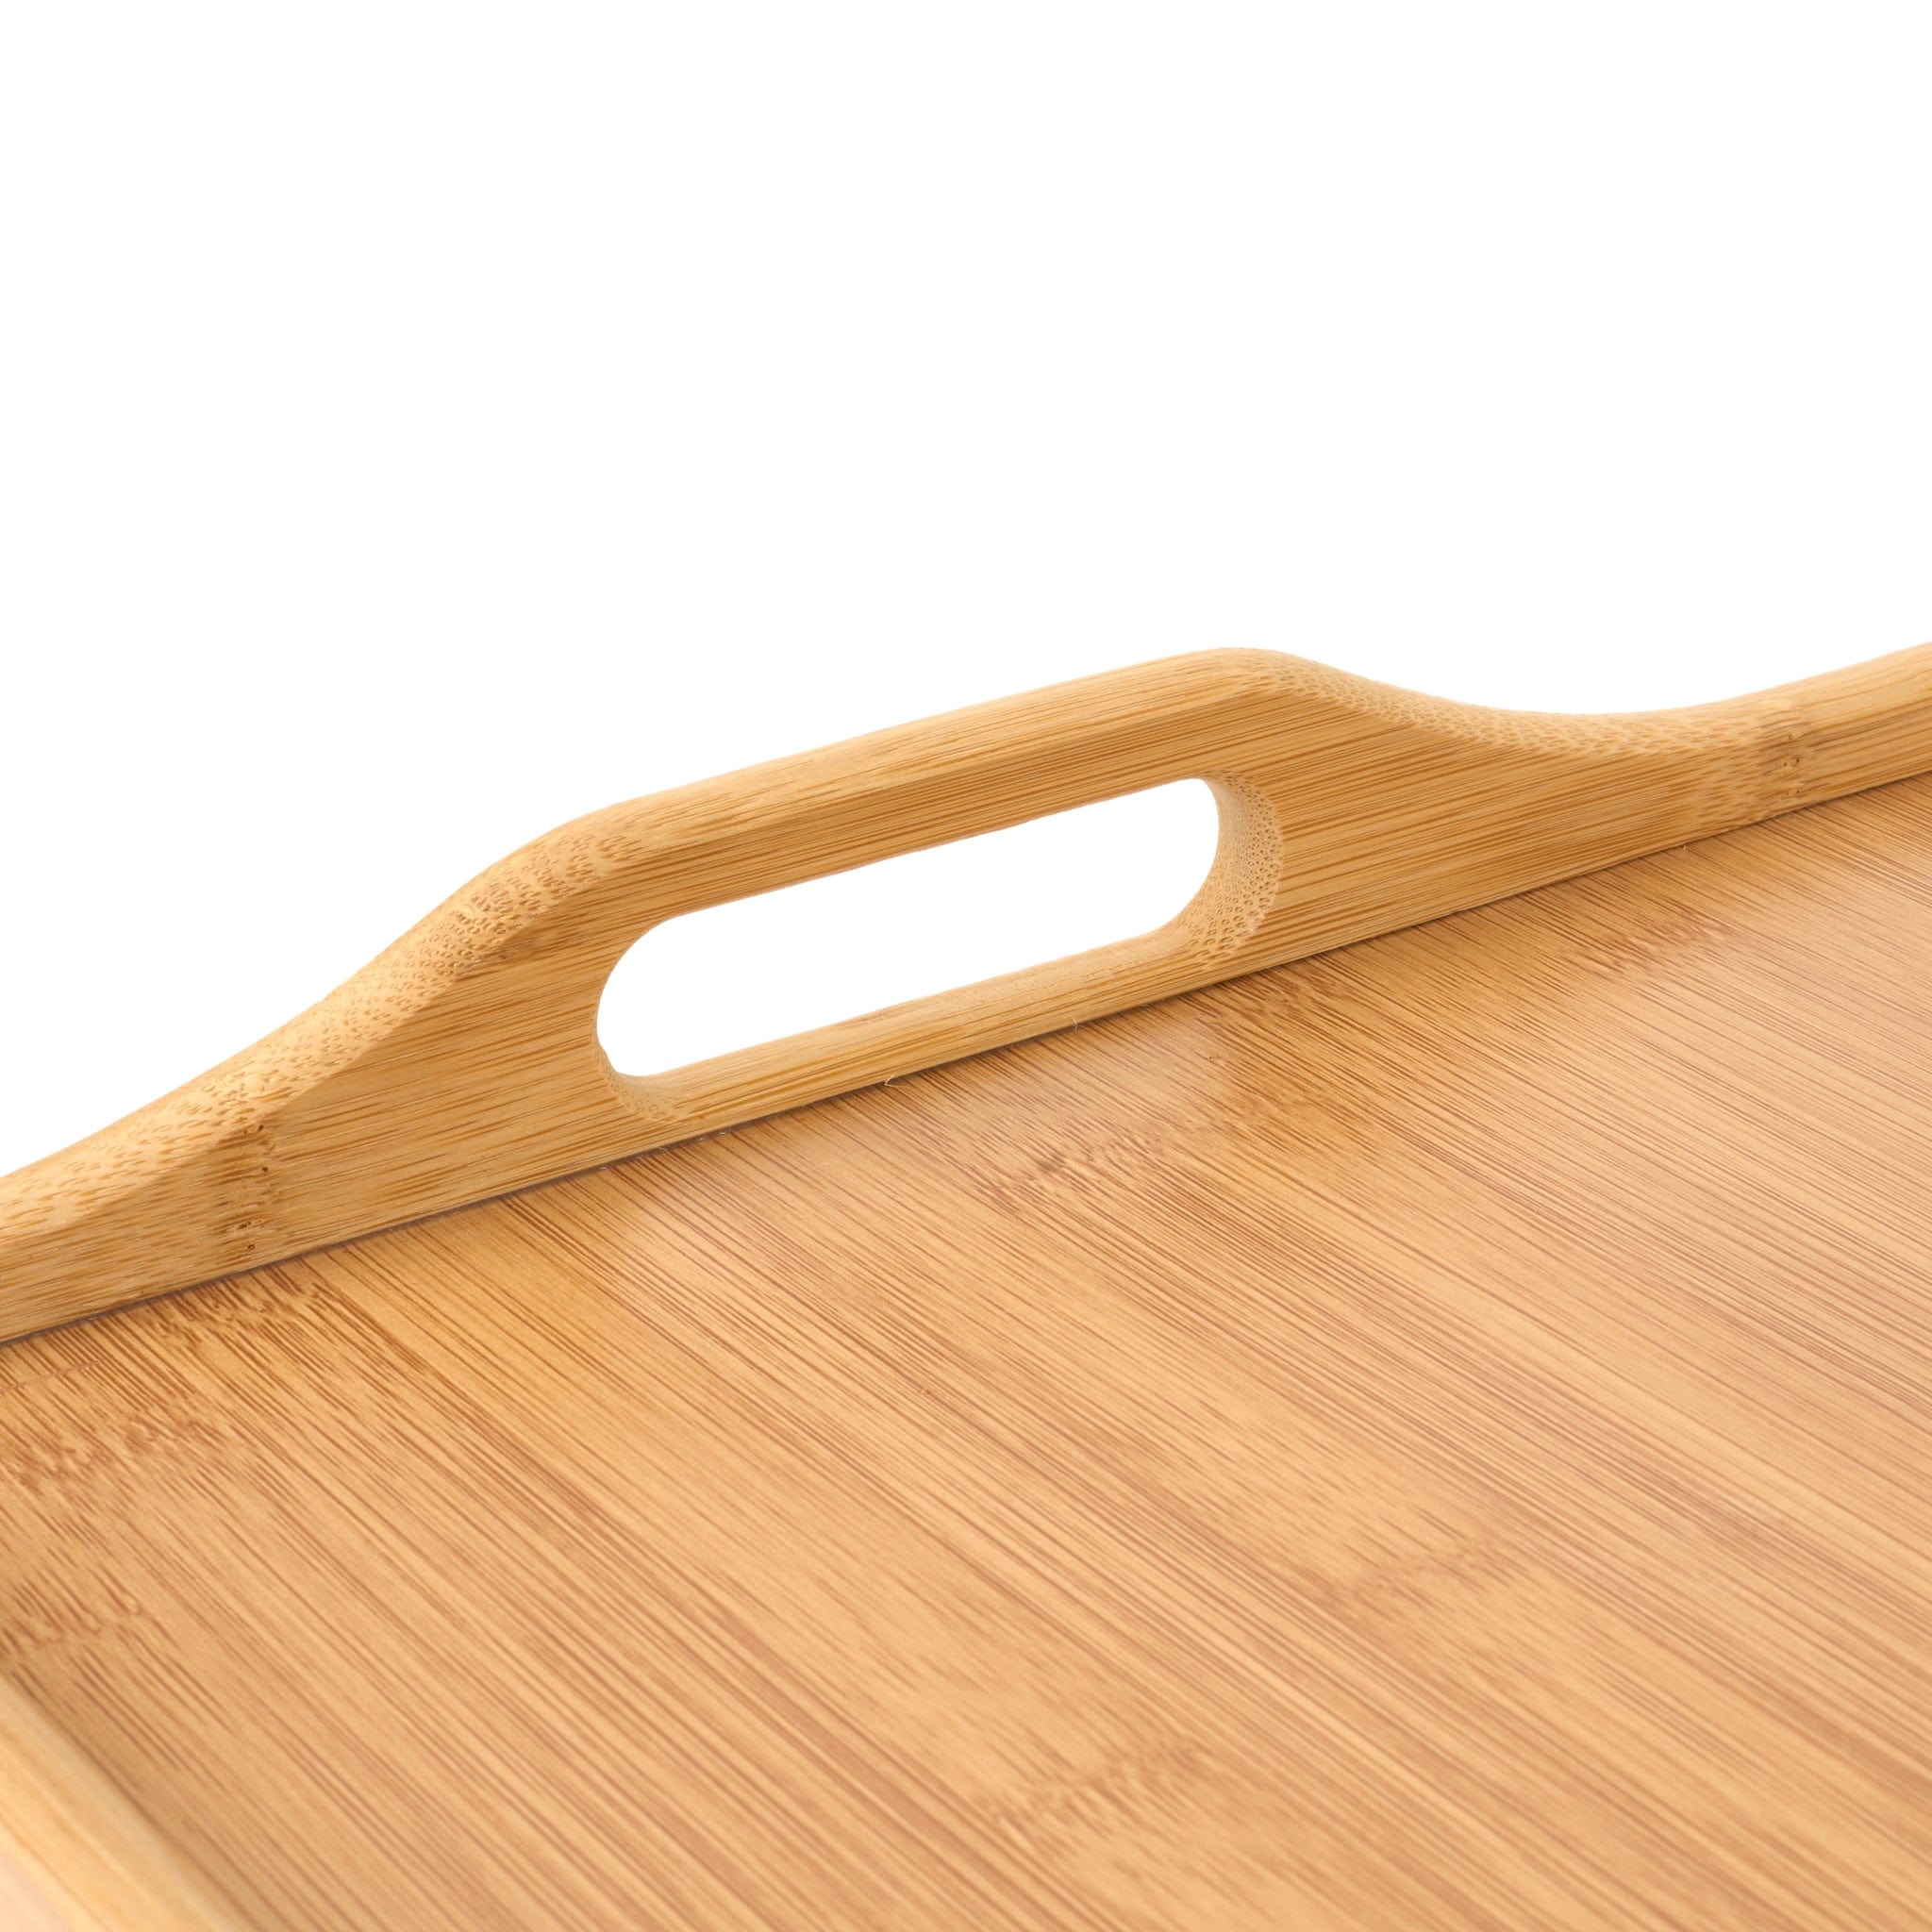 Bamboo Serving Tray With Foldable Legs - 30 x 50cm — only5pounds